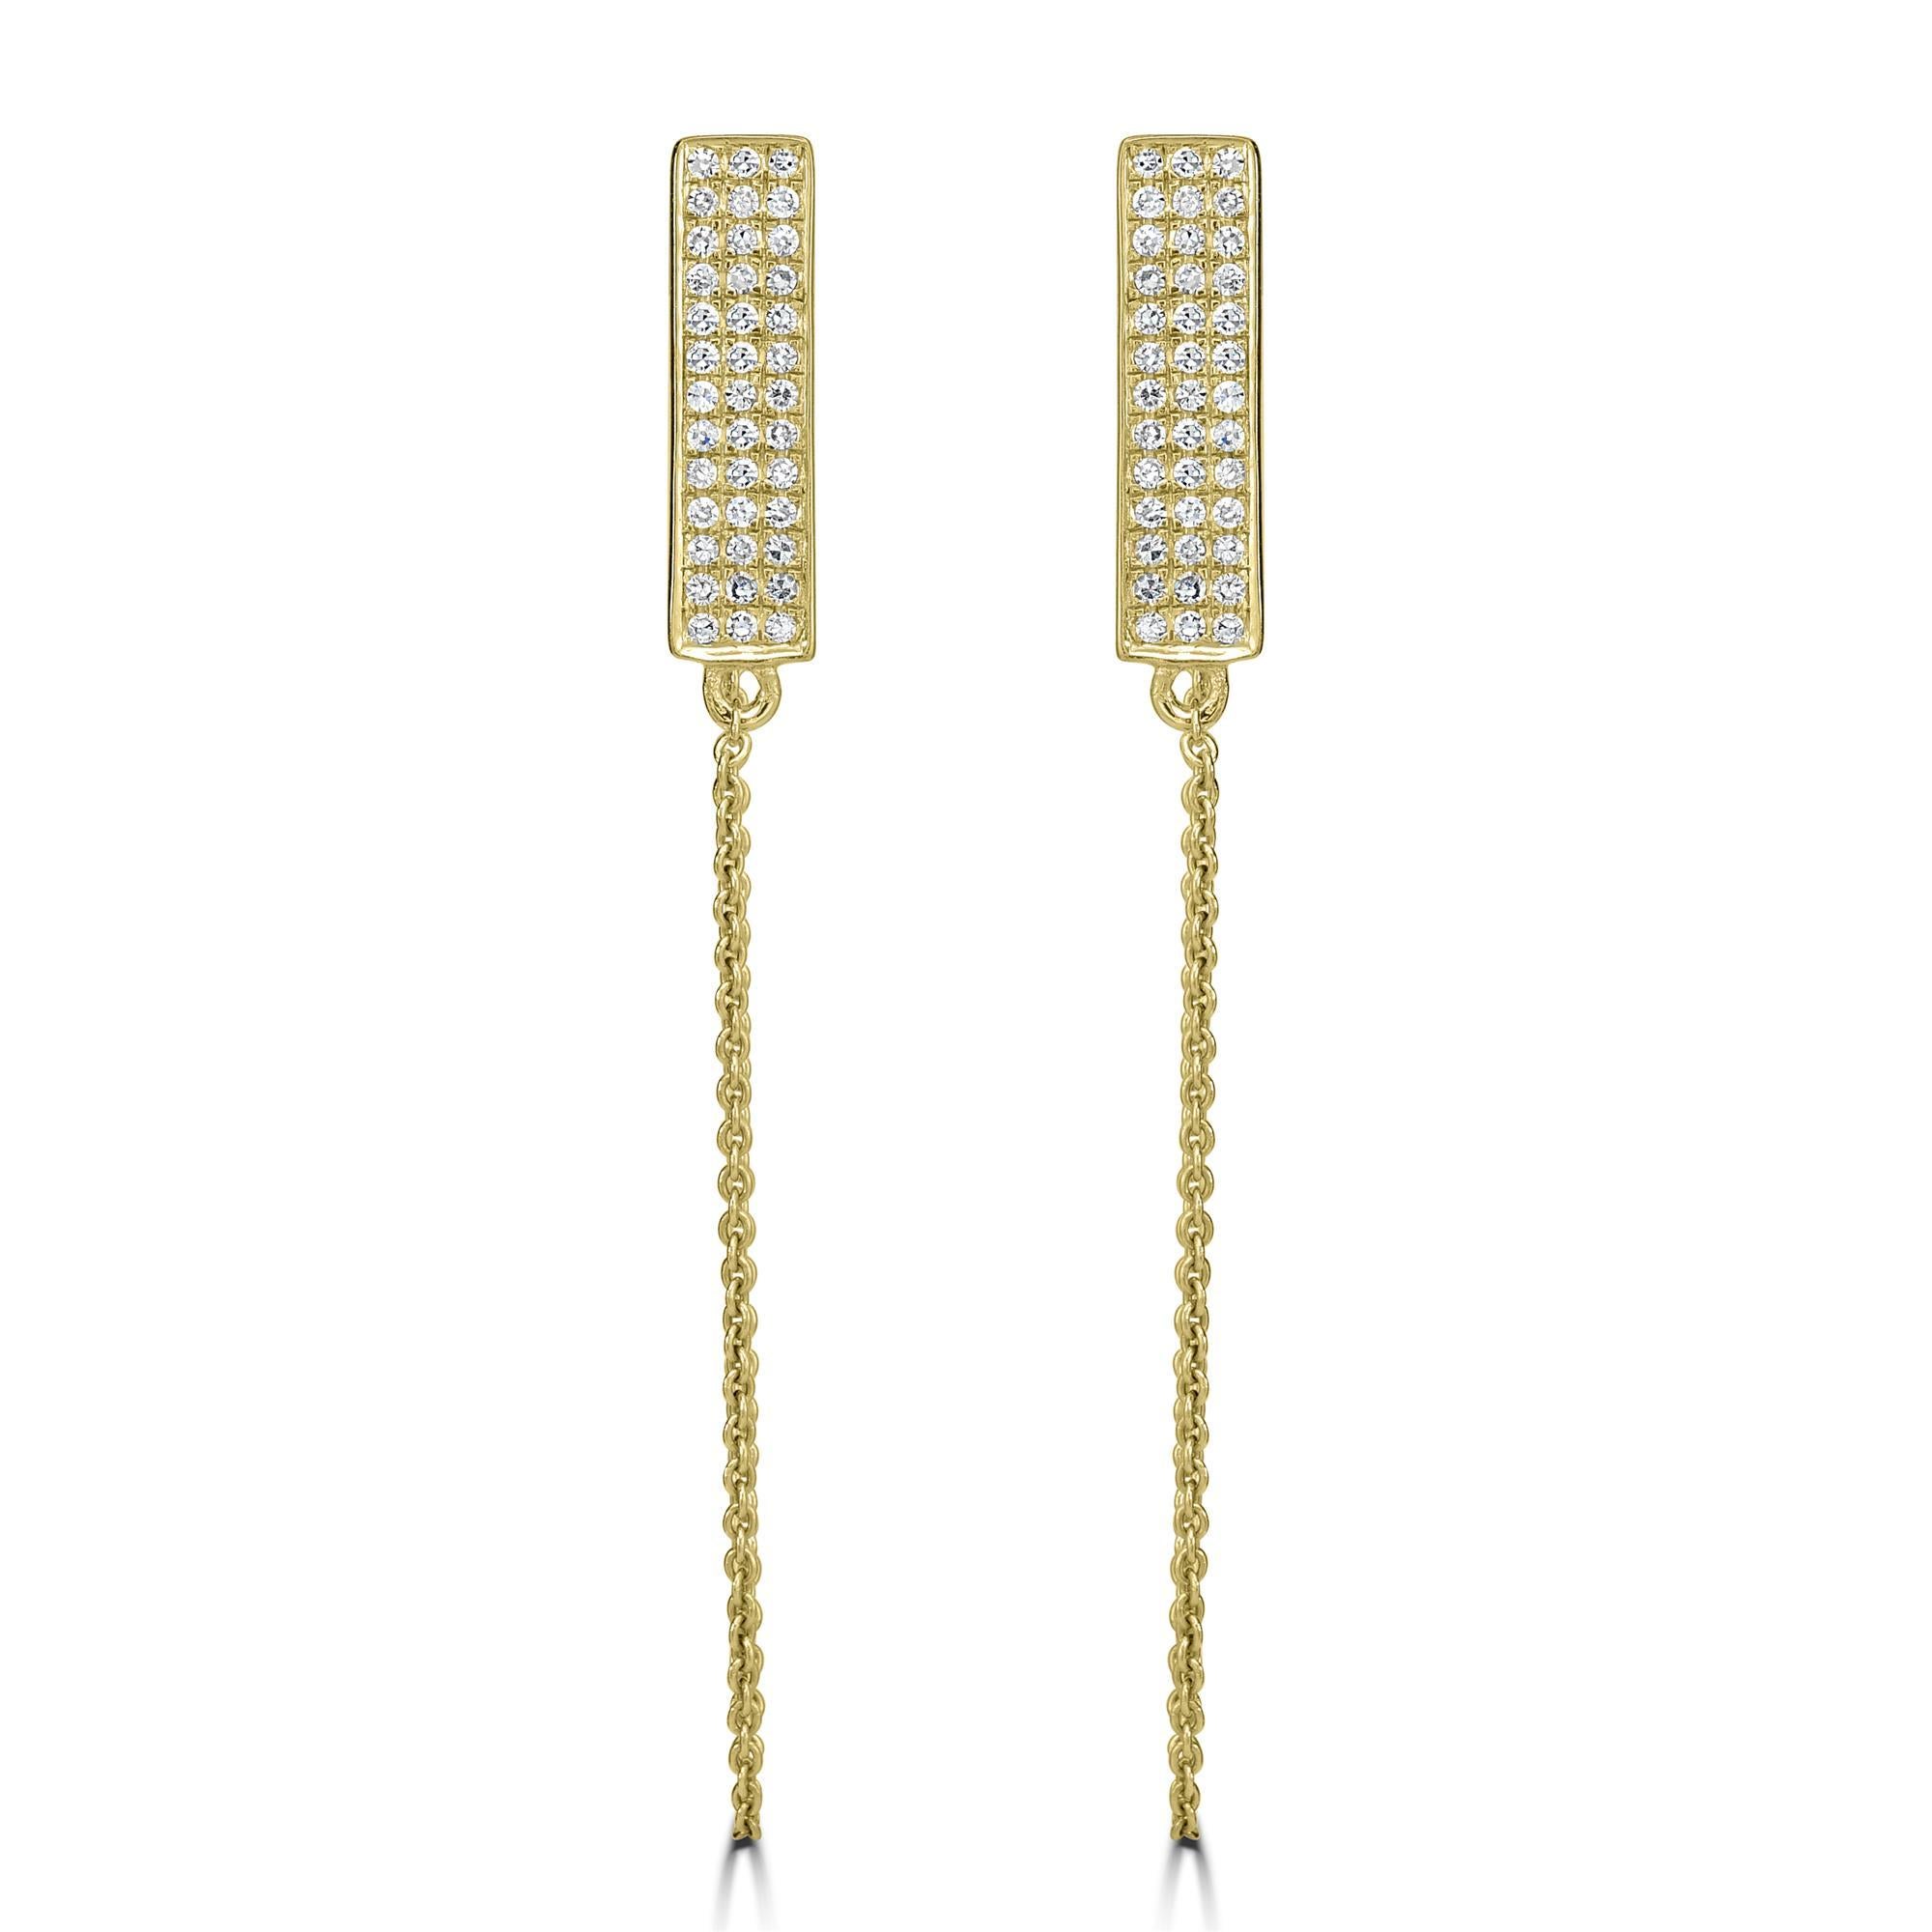 These Luxle Round Diamond Threader Drop Earrings are minimalistic yet so fashionable. Crafted in gleaming 14K yellow gold, studded with 78 round diamonds totaling 0.21 Cts in rectangular motifs at the top with threaders attached to the push-backs.